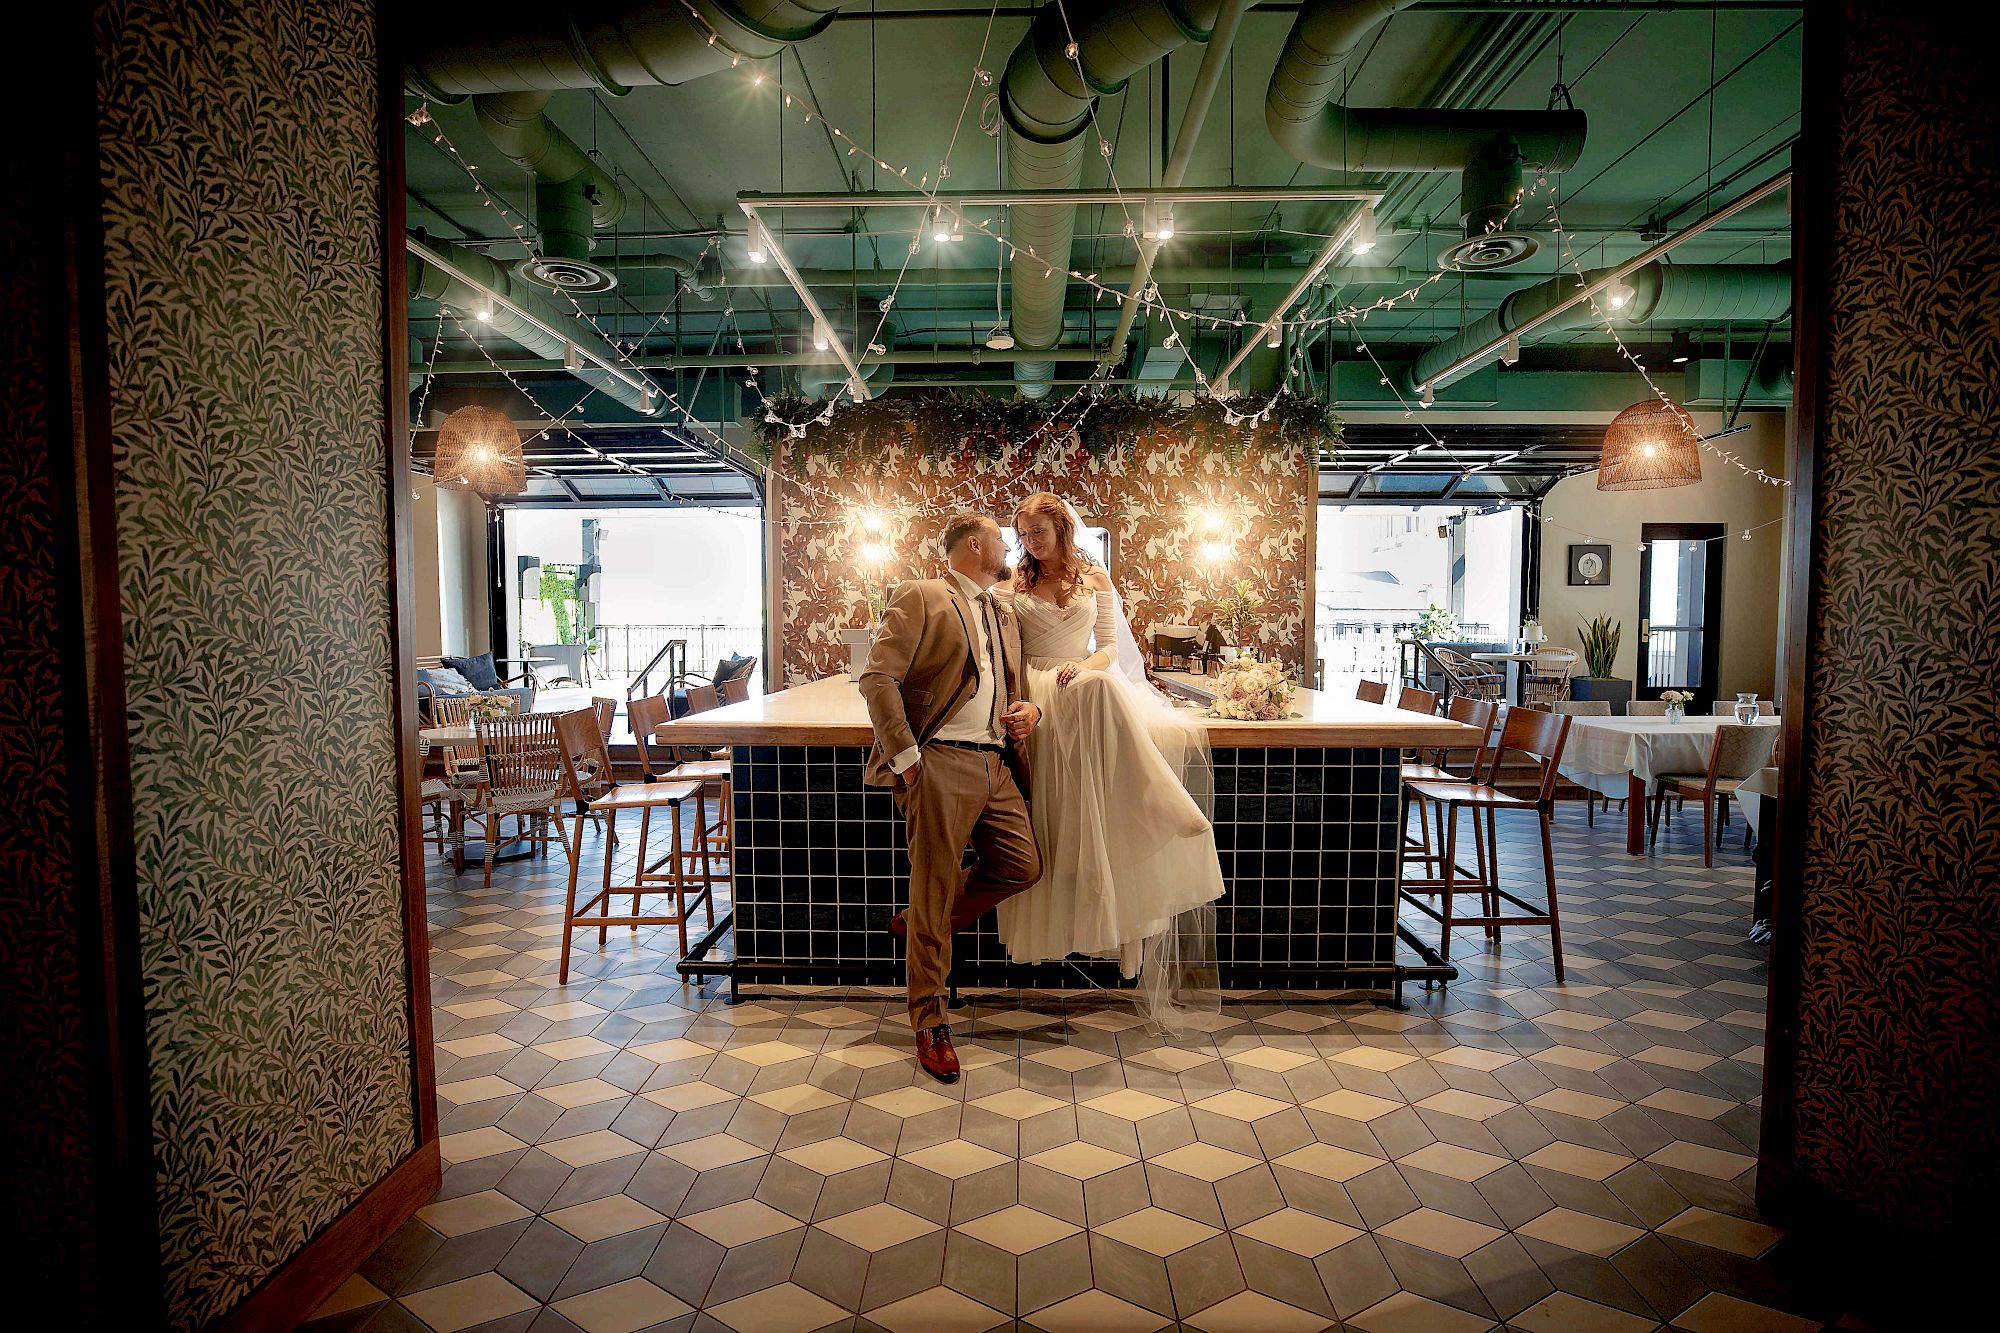 A couple in wedding attire leans against a counter in a stylish, modern restaurant with string lights and patterned tiles adorning the space.